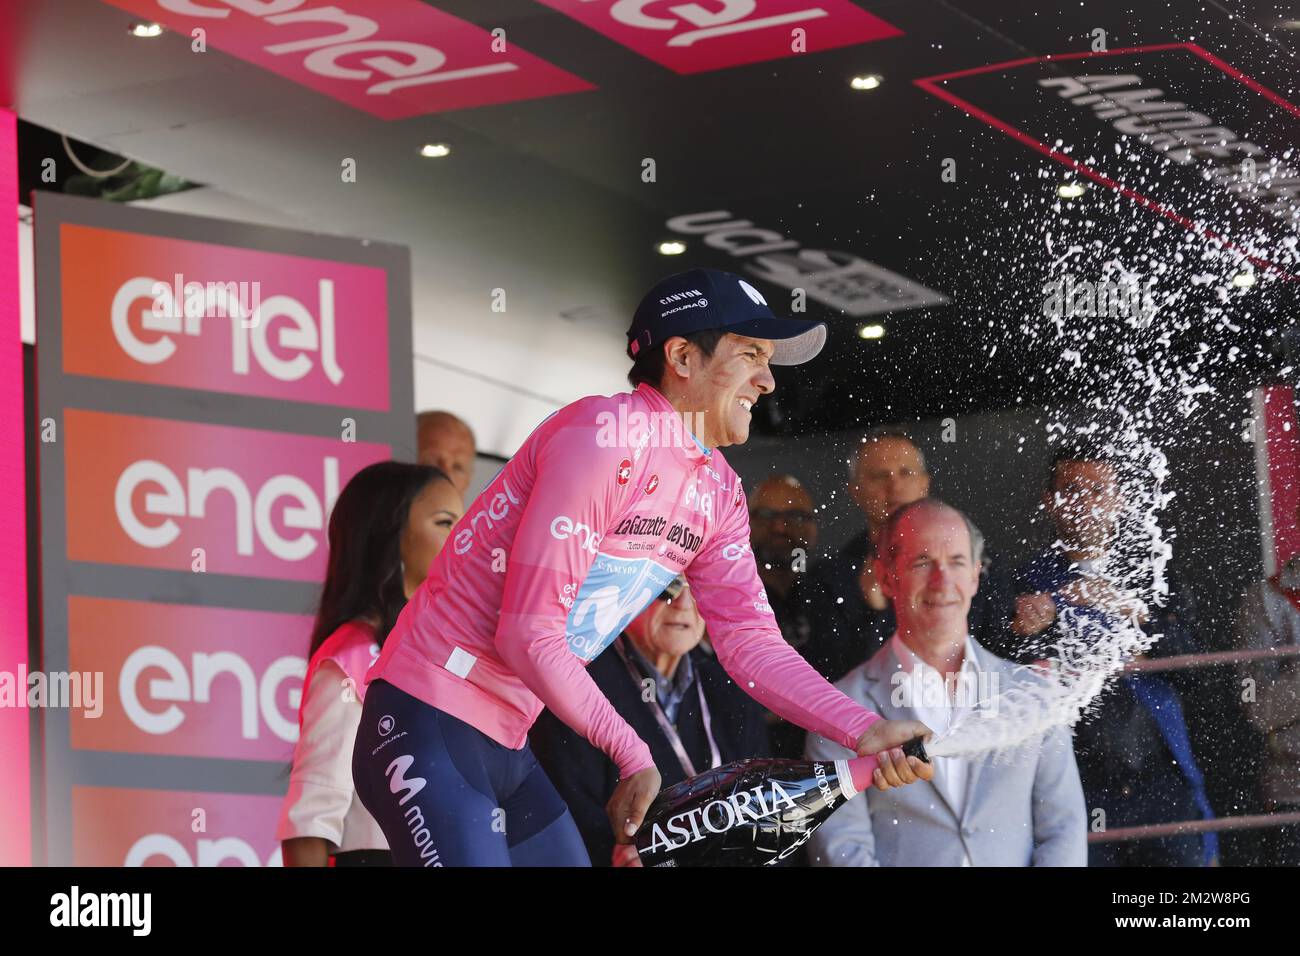 Ecuadorian Richard Carapaz of Movistar Team celebrates in the pink jersey of leader in the overall ranking after the twentieth stage of the 101st edition of the Giro D'Italia cycling race, 194km from Feltre to Croce d'Aune-Monte Avena, Italy, Saturday 01 June 2019. BELGA PHOTO YUZURU SUNADA FRANCE OUT  Stock Photo